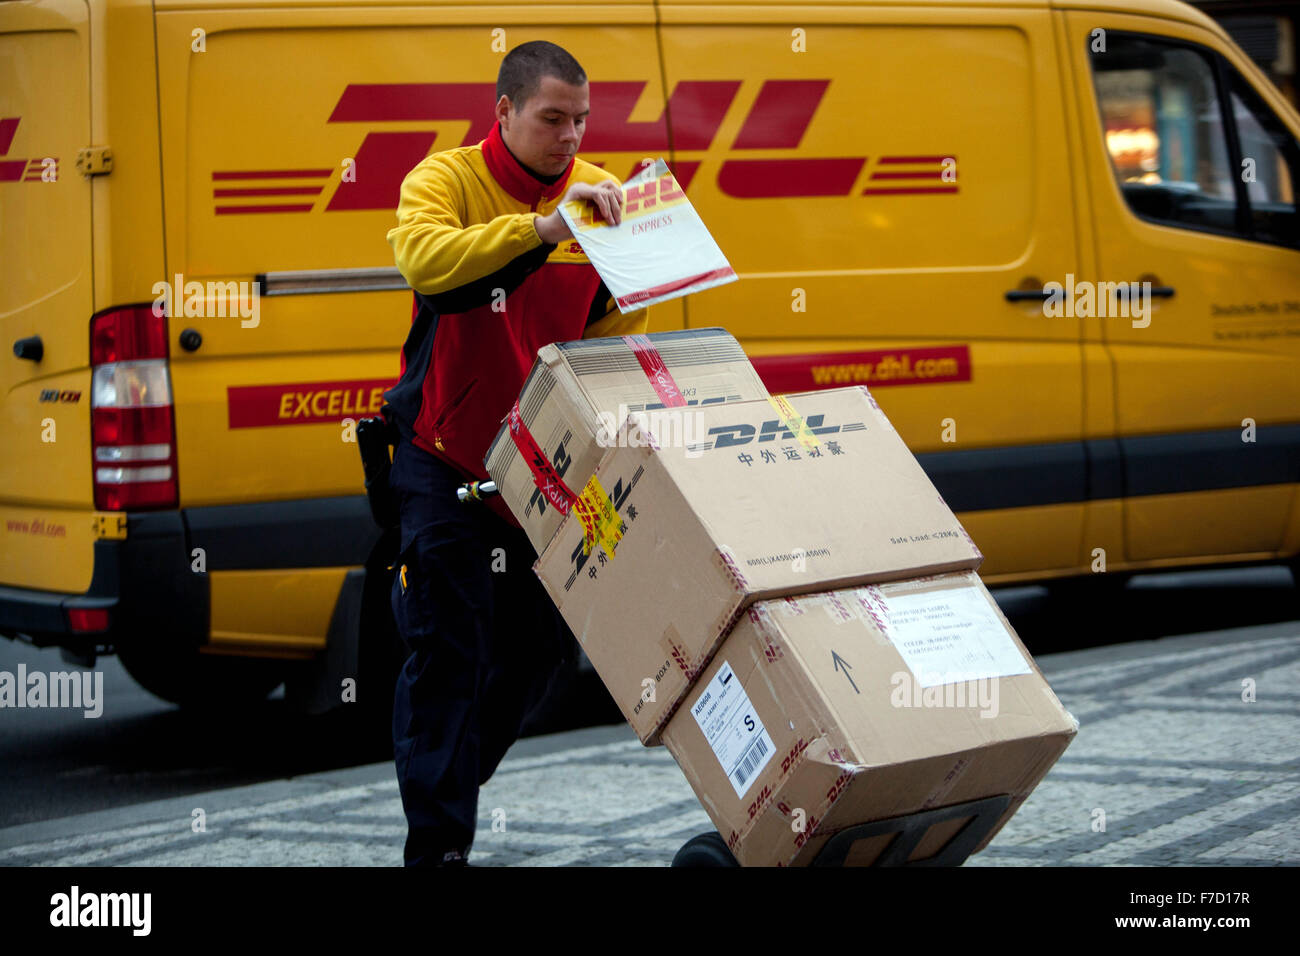 DHL employee delivering packages, Czech Republic Stock Photo - Alamy